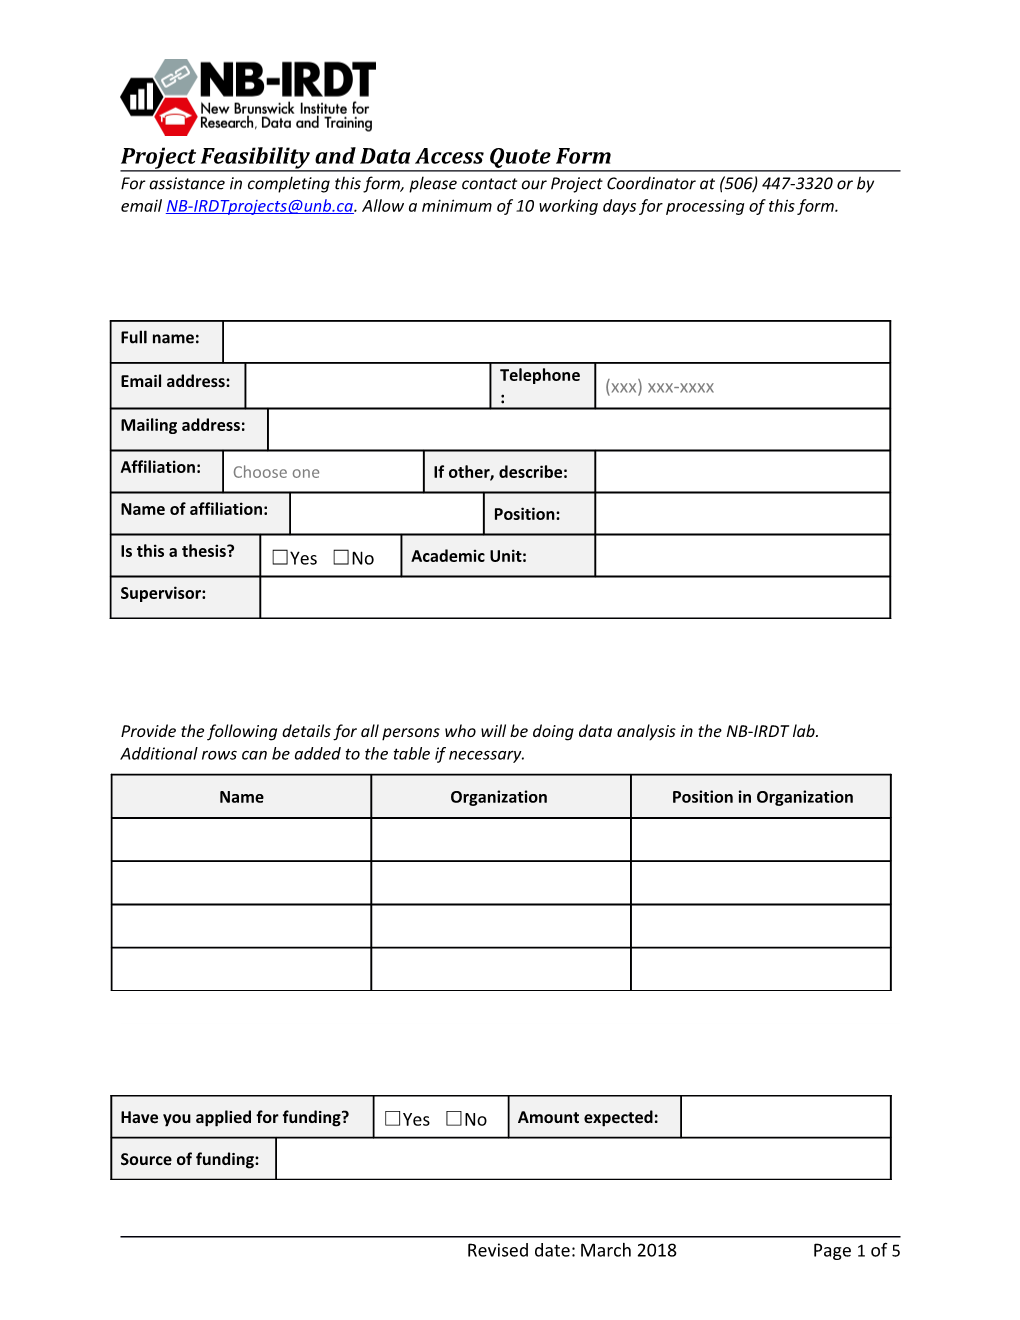 Project Feasibility and Data Access Quote Form